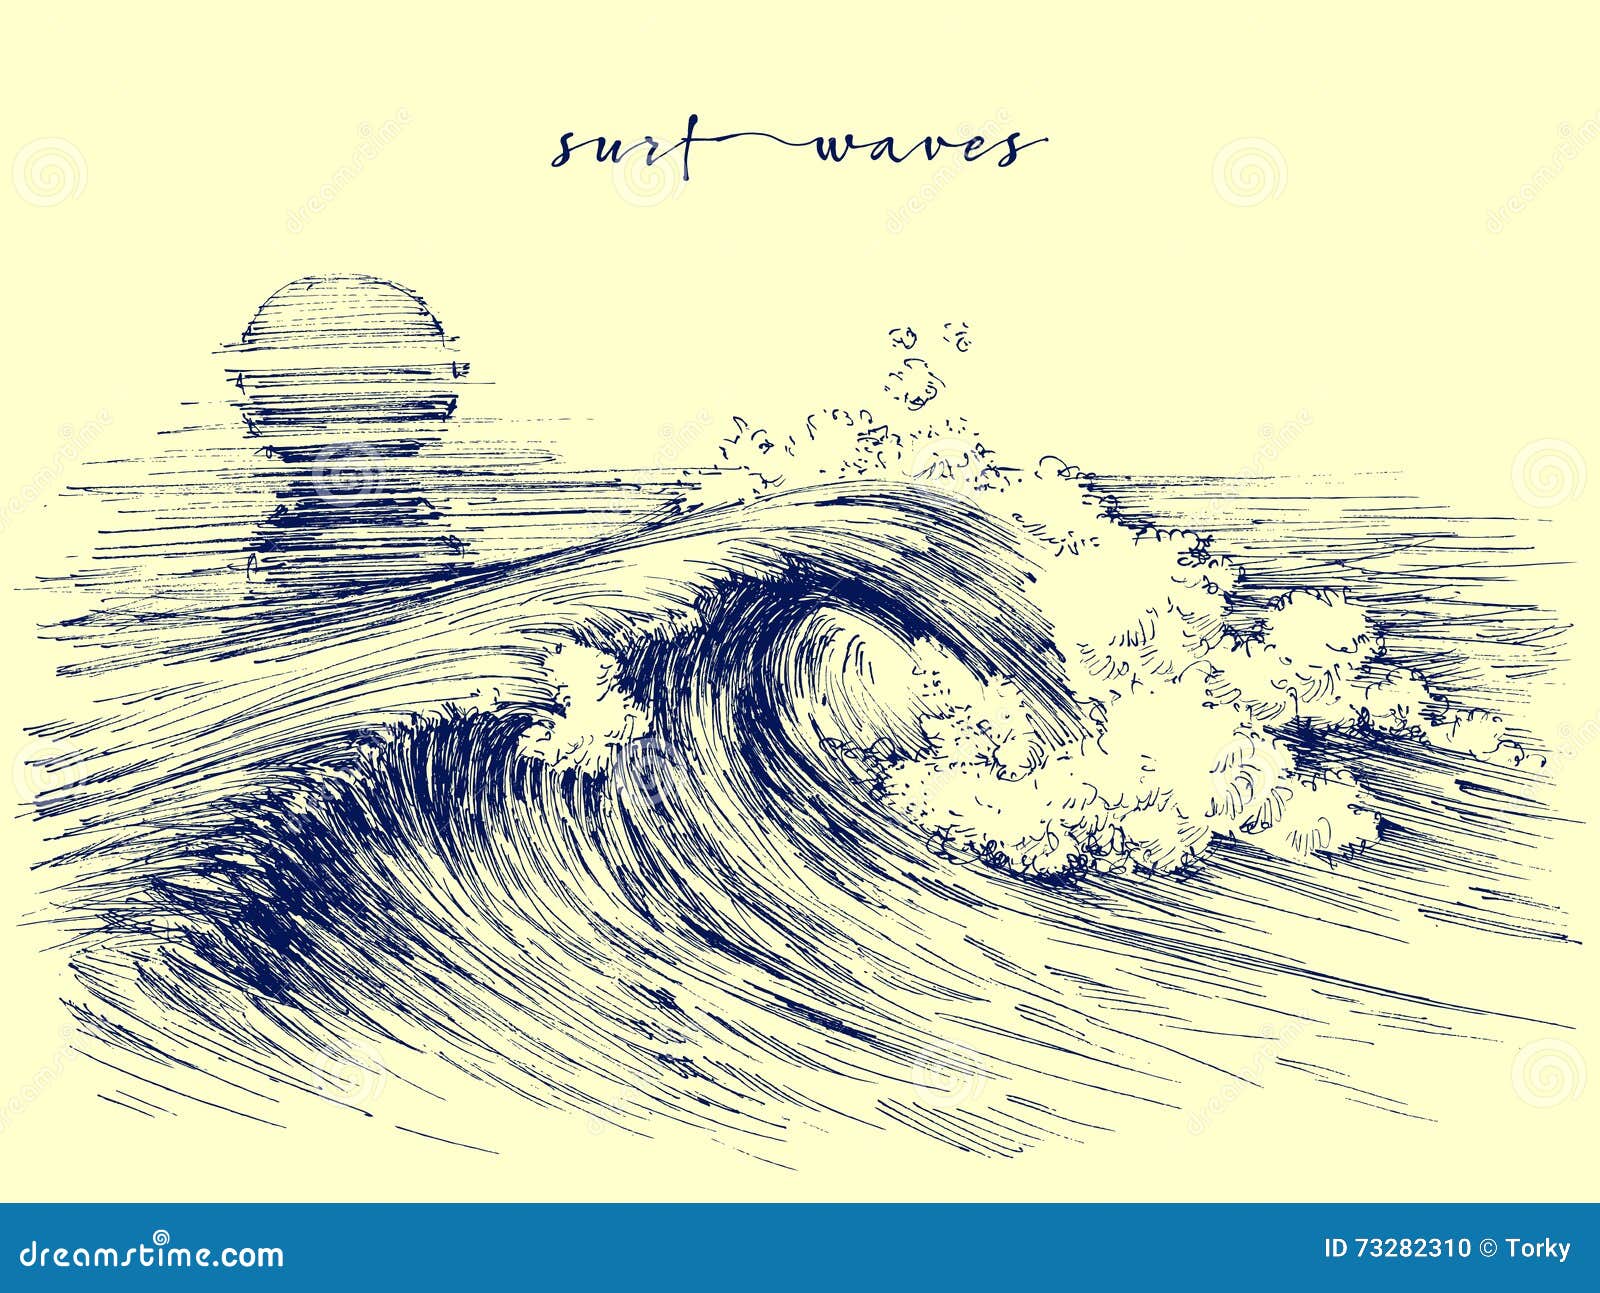 surf waves. sea waves graphic